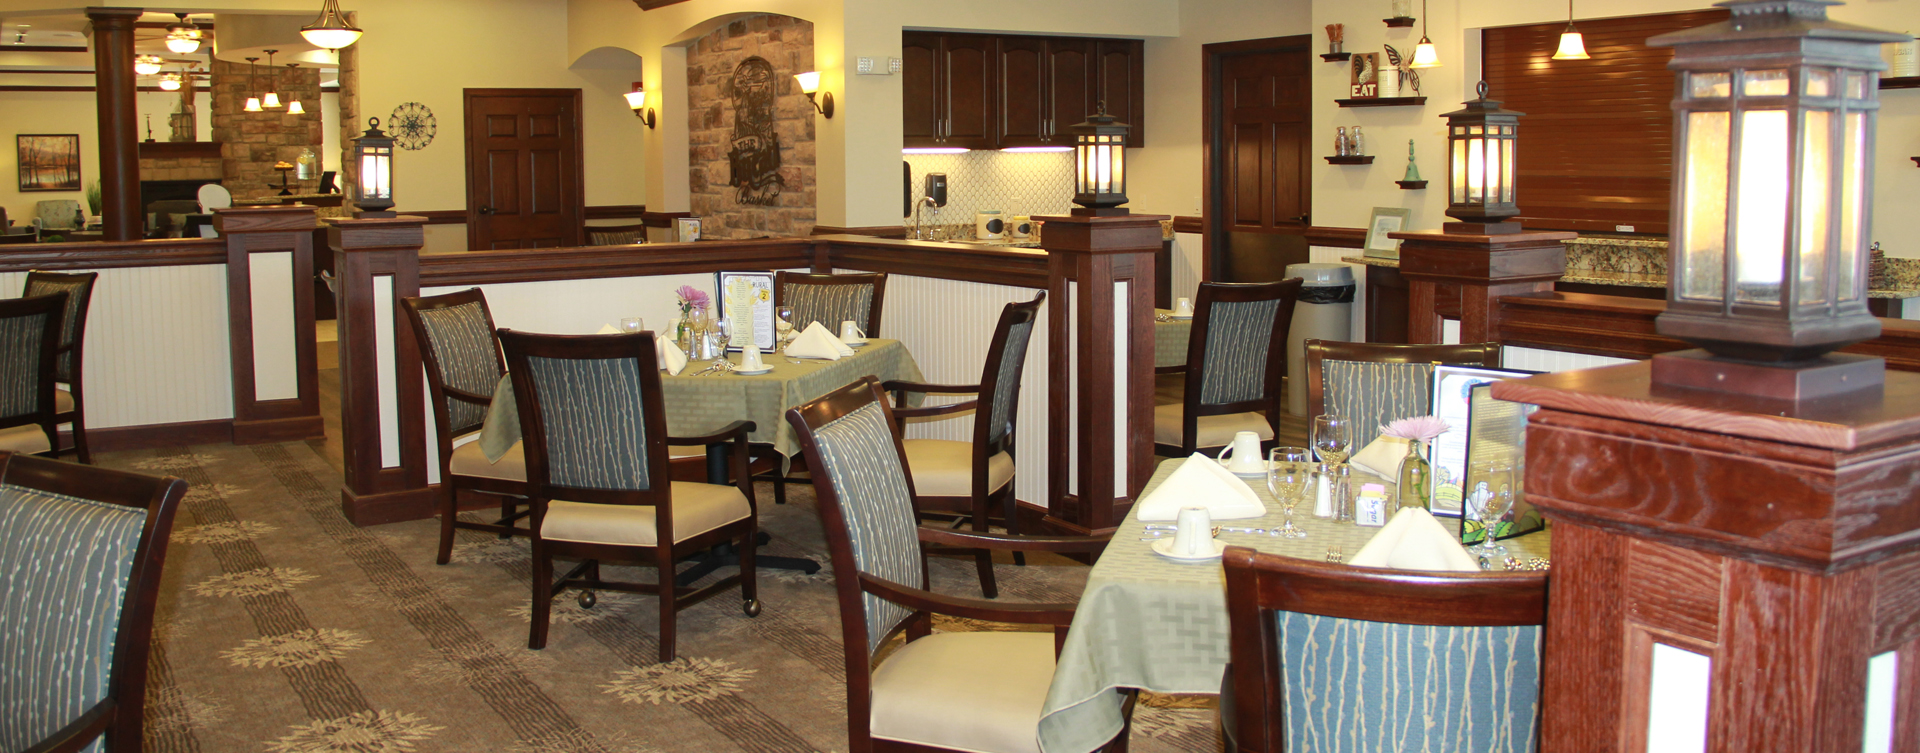 Enjoy restaurant -style meals served three times a day in our dining room at Bickford of Chesterfield